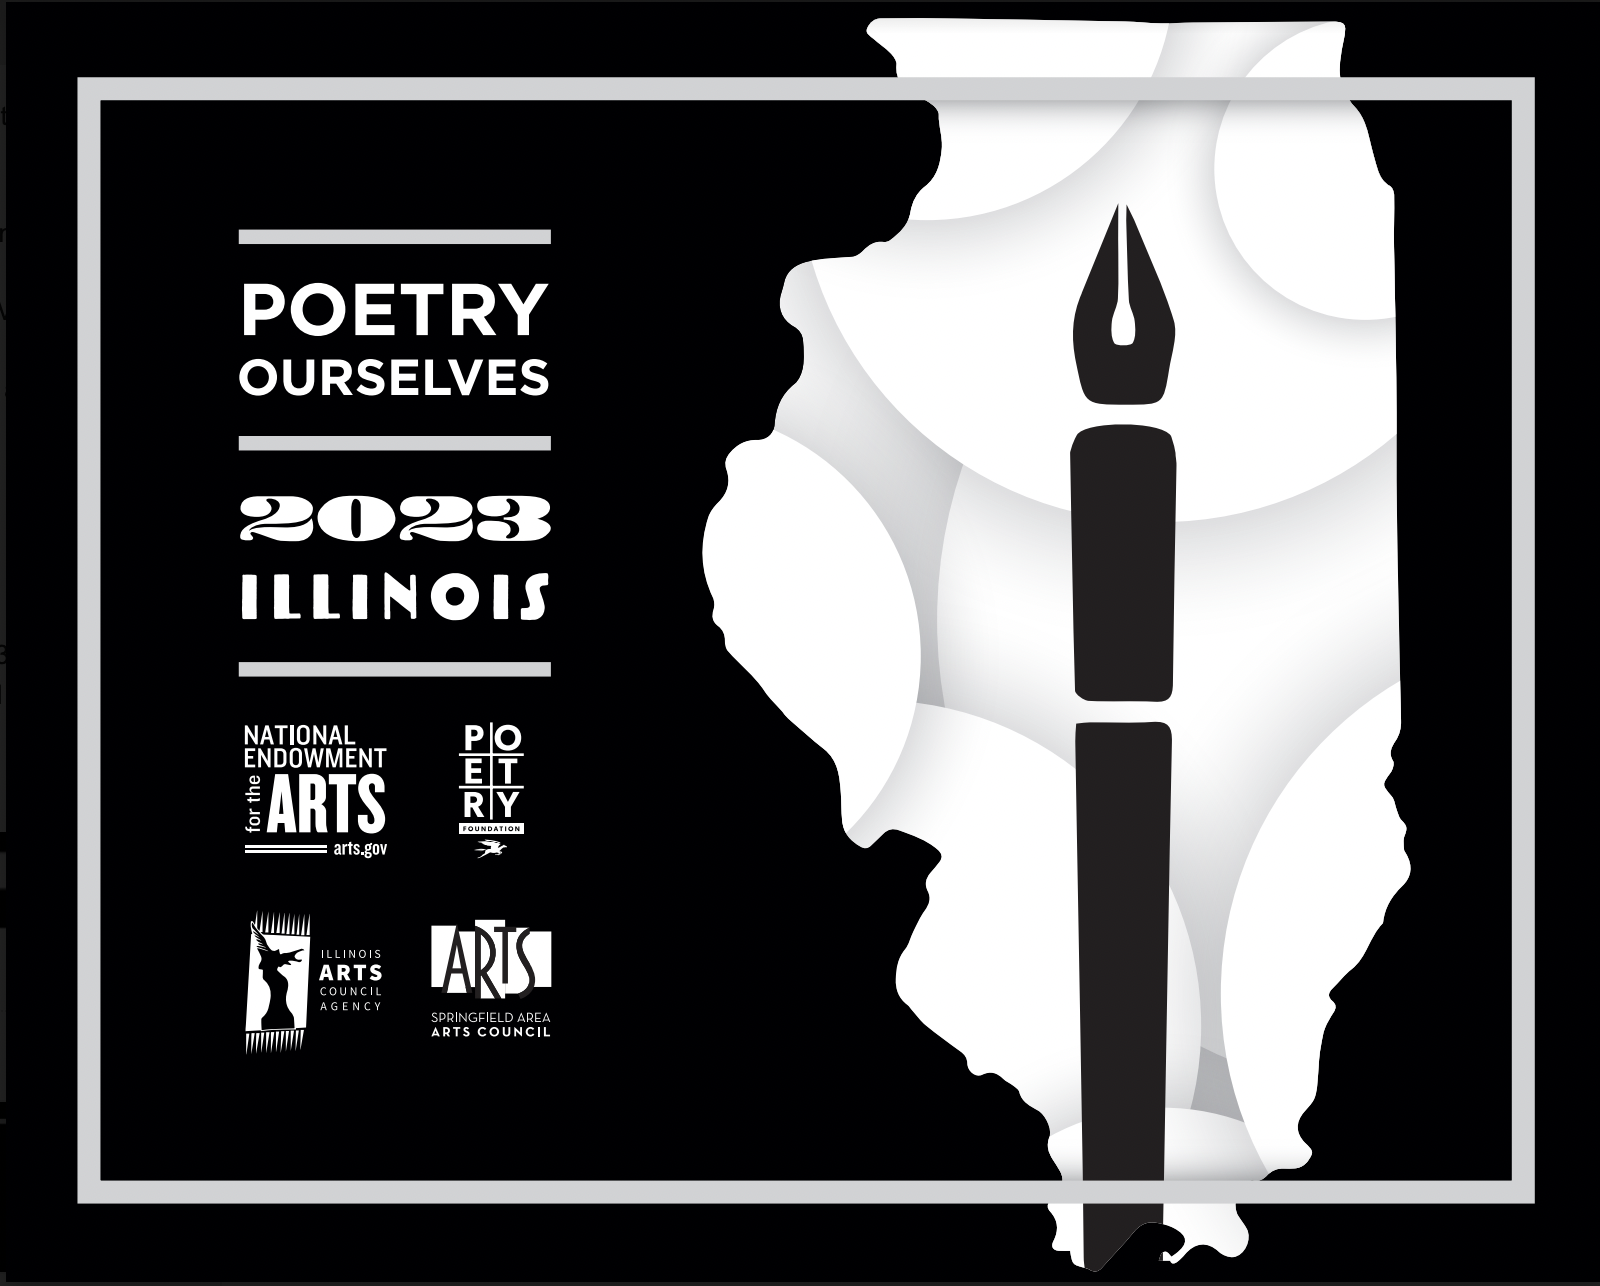 The Springfield Area Arts Council announces winners of the Illinois State 2023 Poetry Ourselves Contest